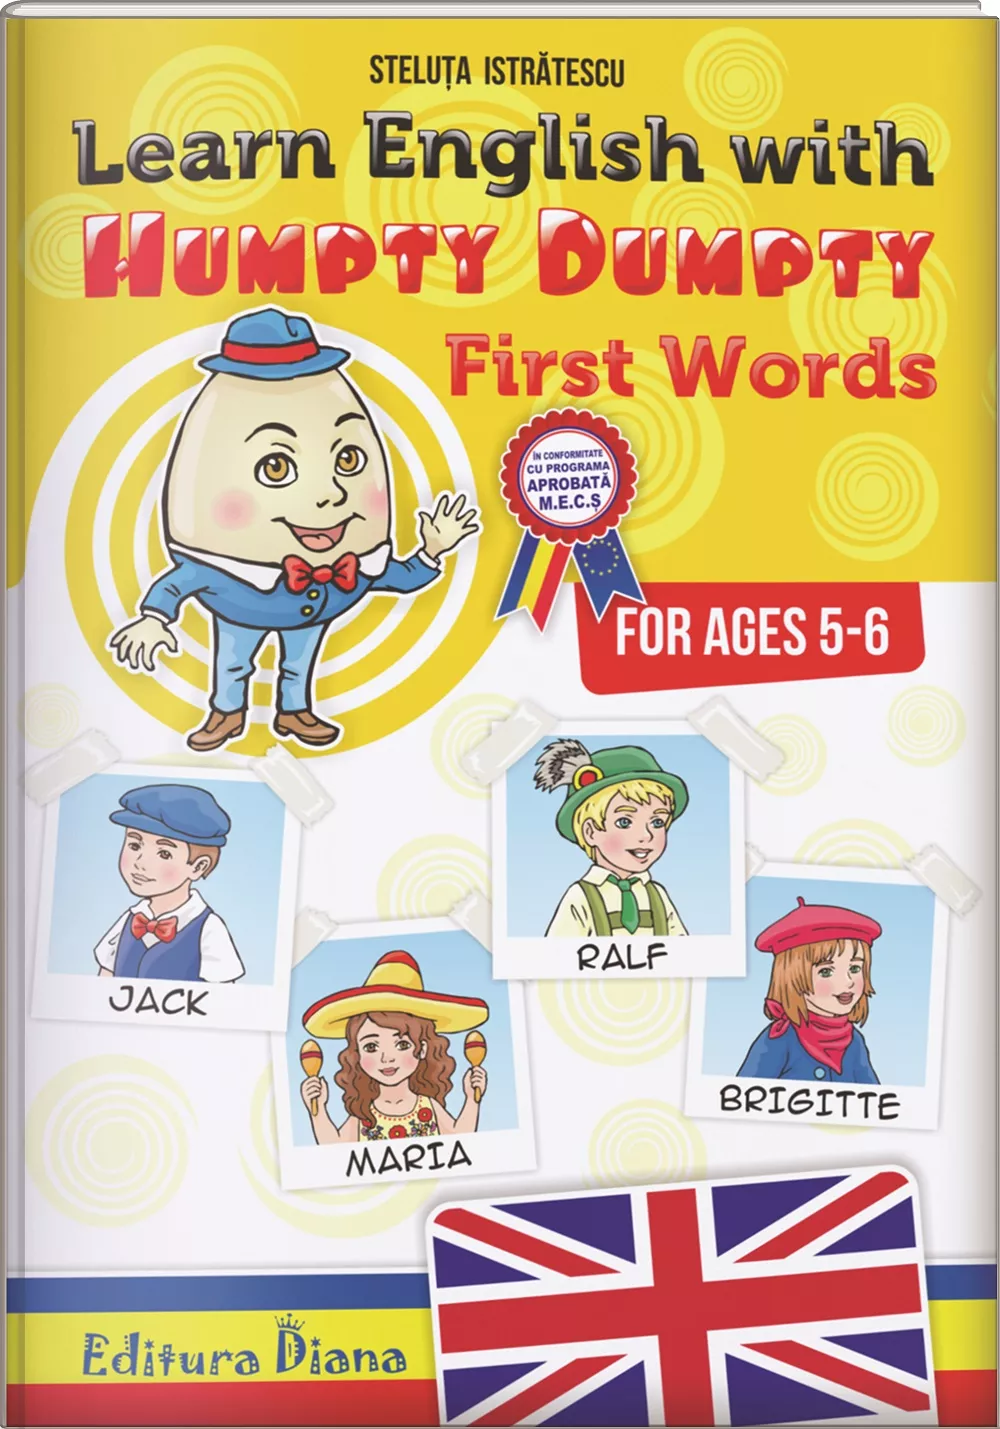 Learn English with Humpty Dumpty - first words